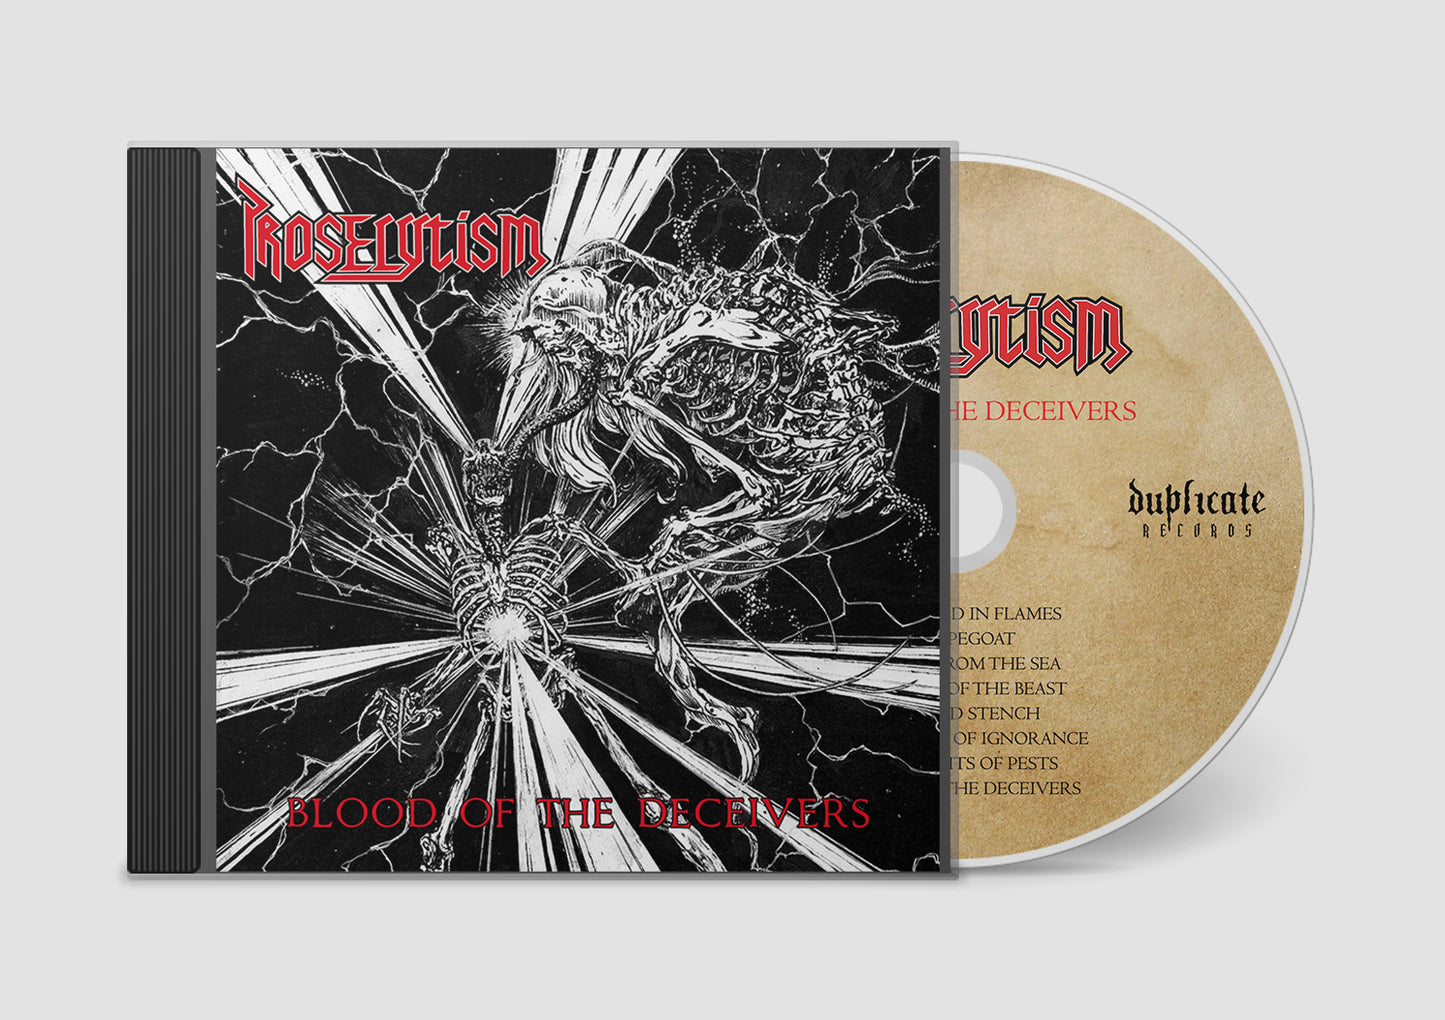 PROSELYTISM - Blood Of The Deceivers CD